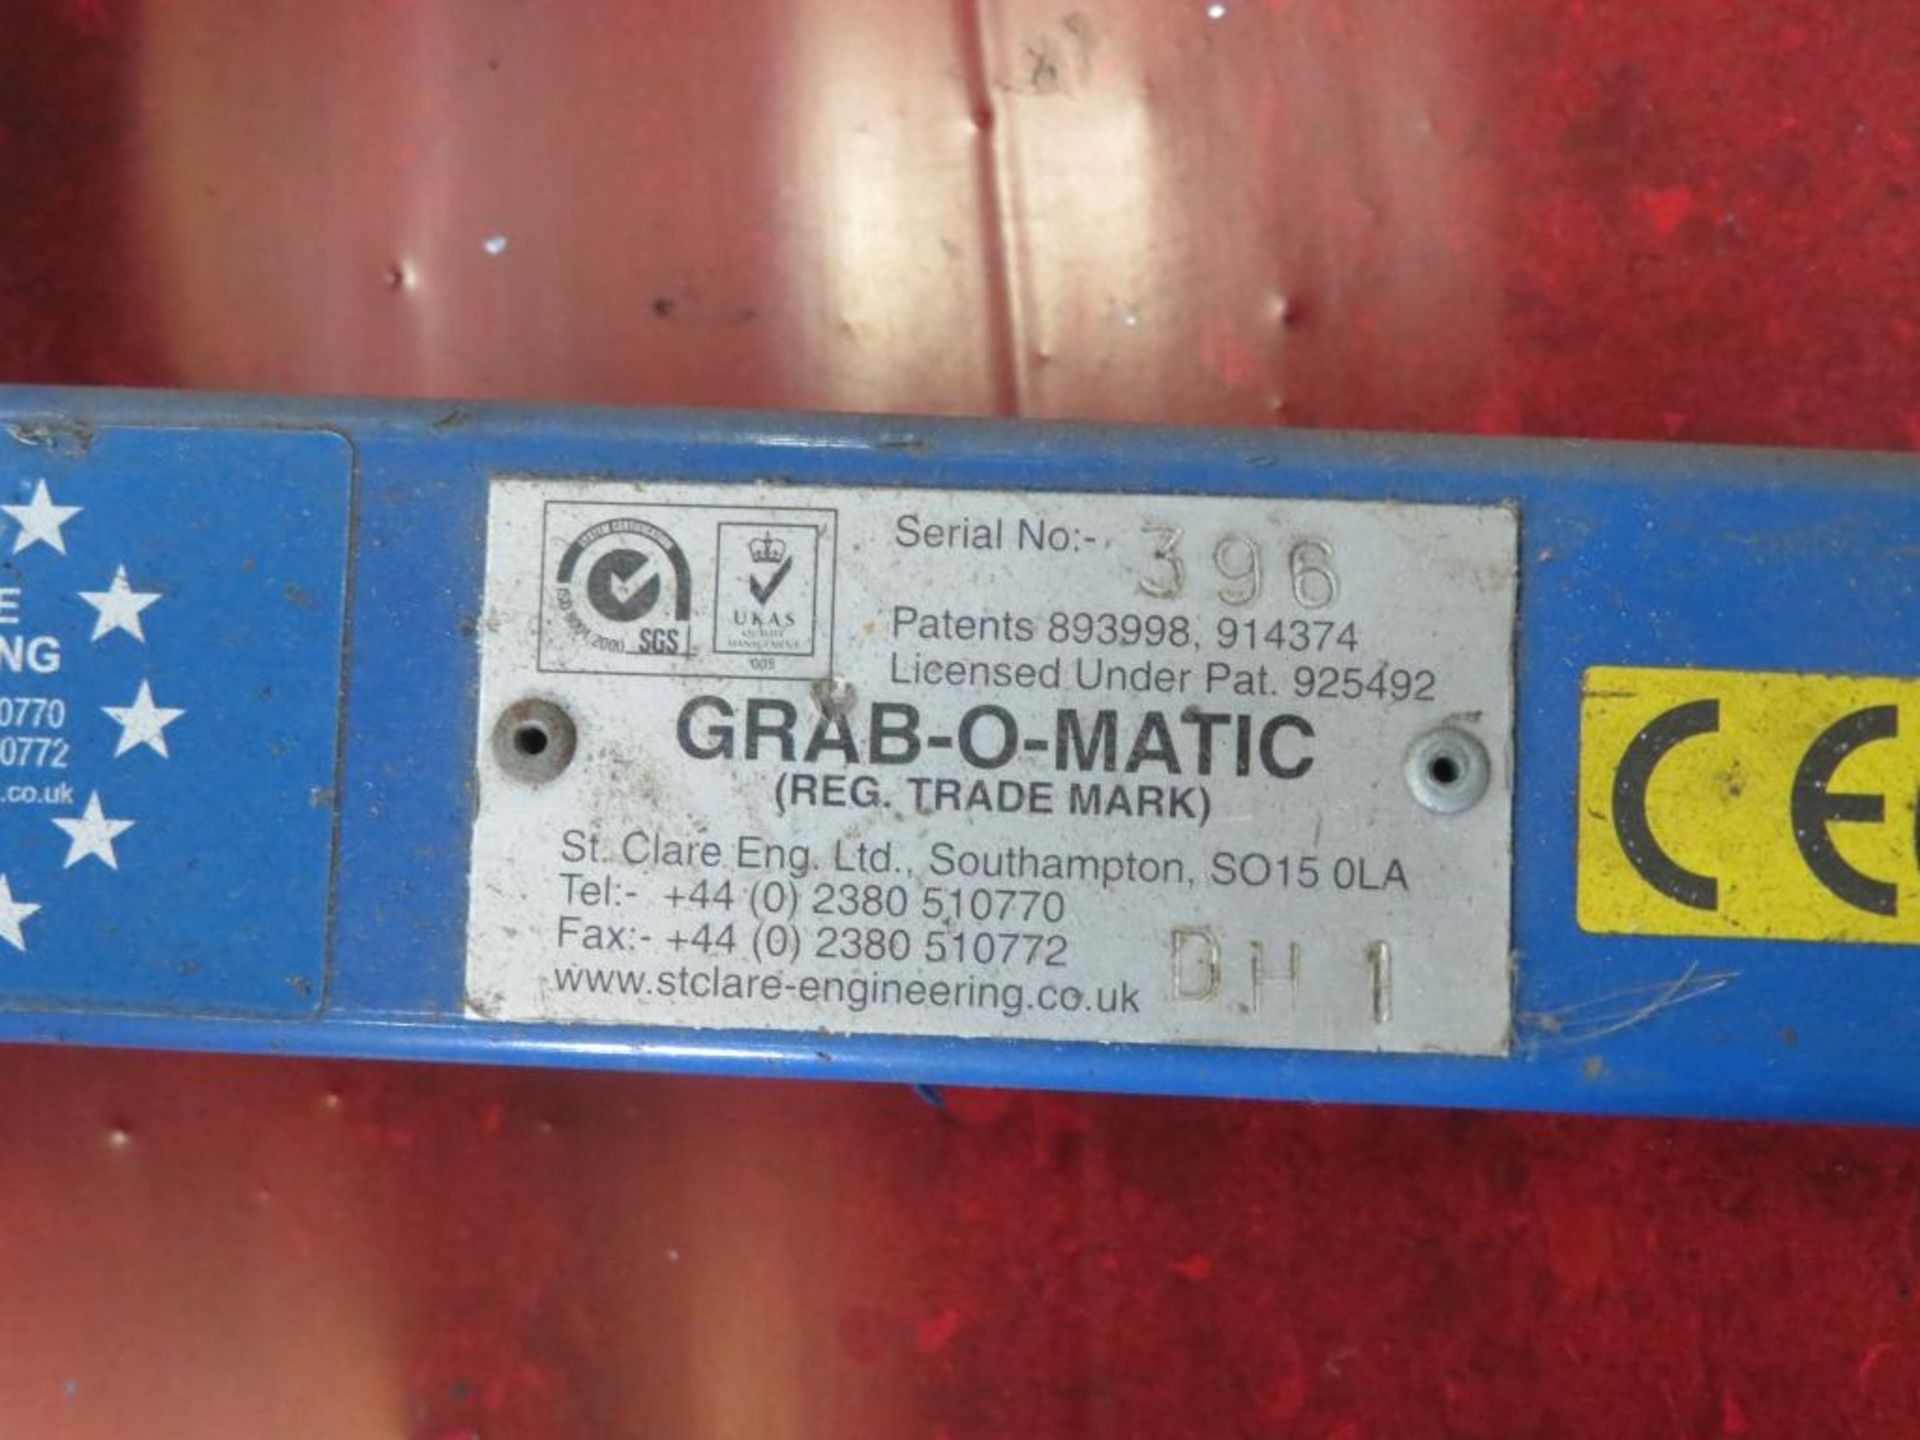 Grab-O-Matic drum handler forklift attachment no. 396, 40 Kg capacity LOLER certification: expiry - Image 3 of 3